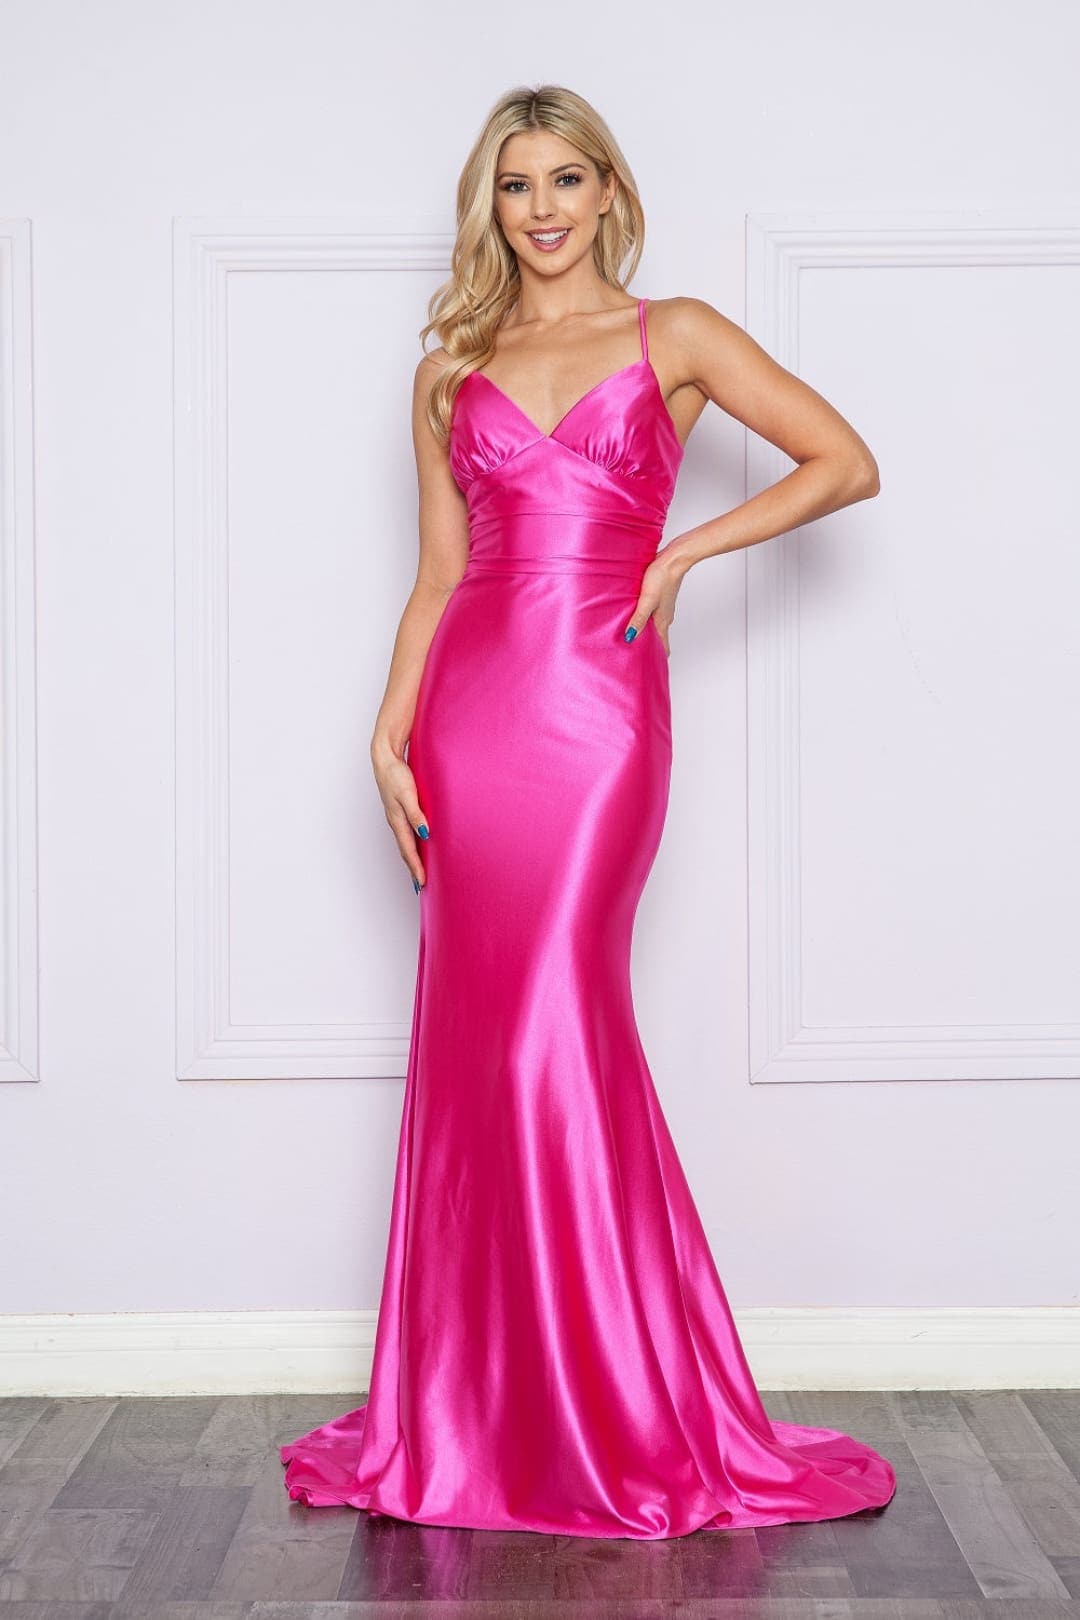 Poly USA 9256 V-neck Cut Out Back Satin Stretchy Evening Formal Gown - HOT PINK / XS - Dress